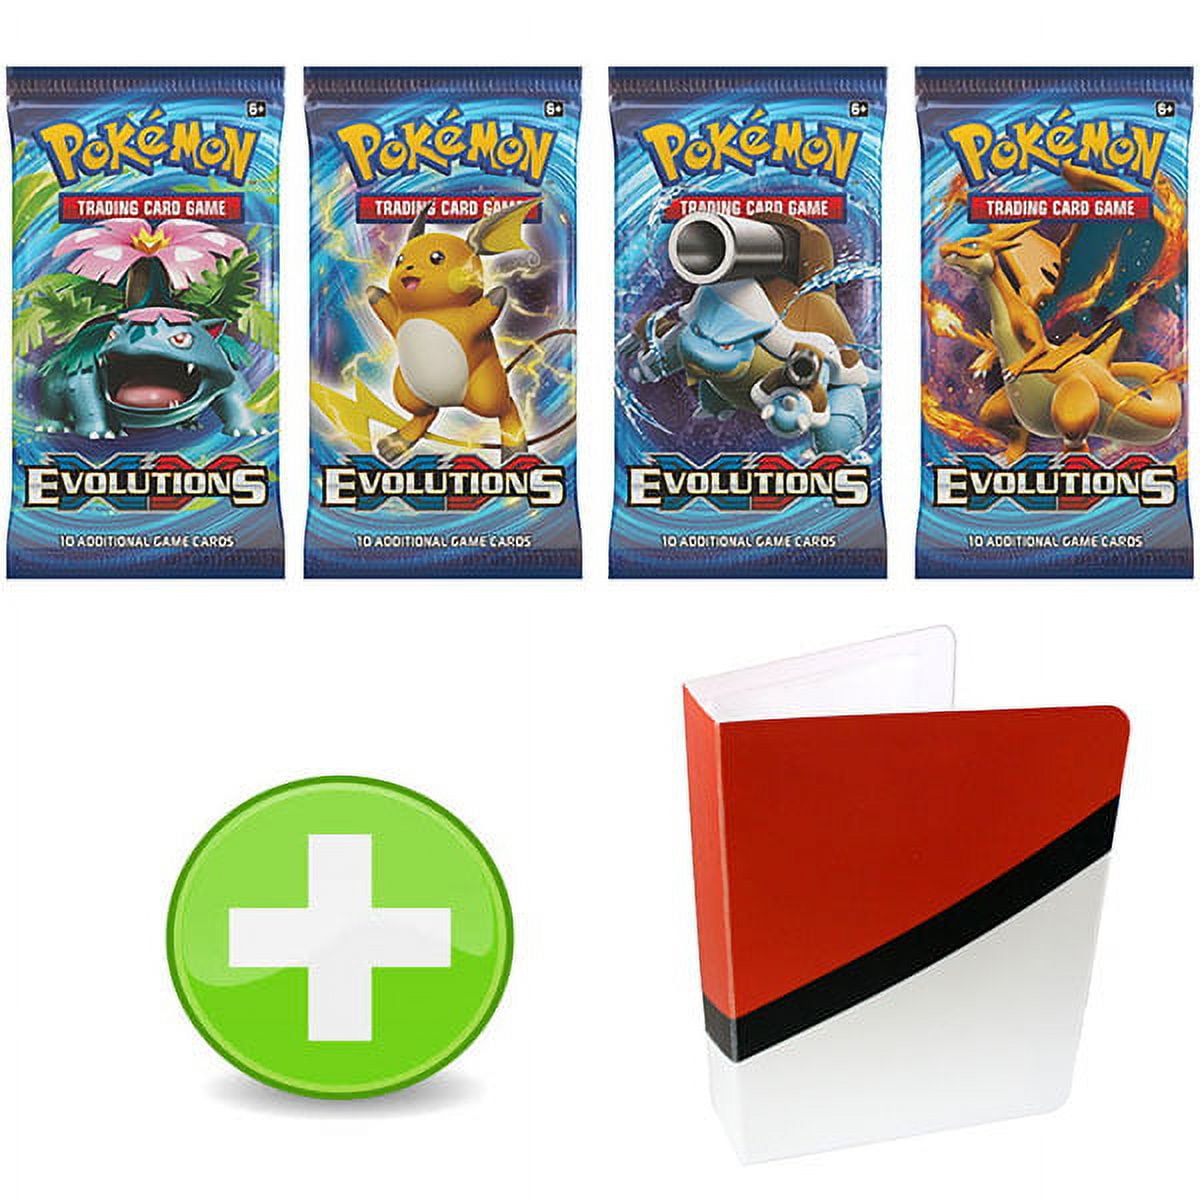 XY Evolutions booster pack 